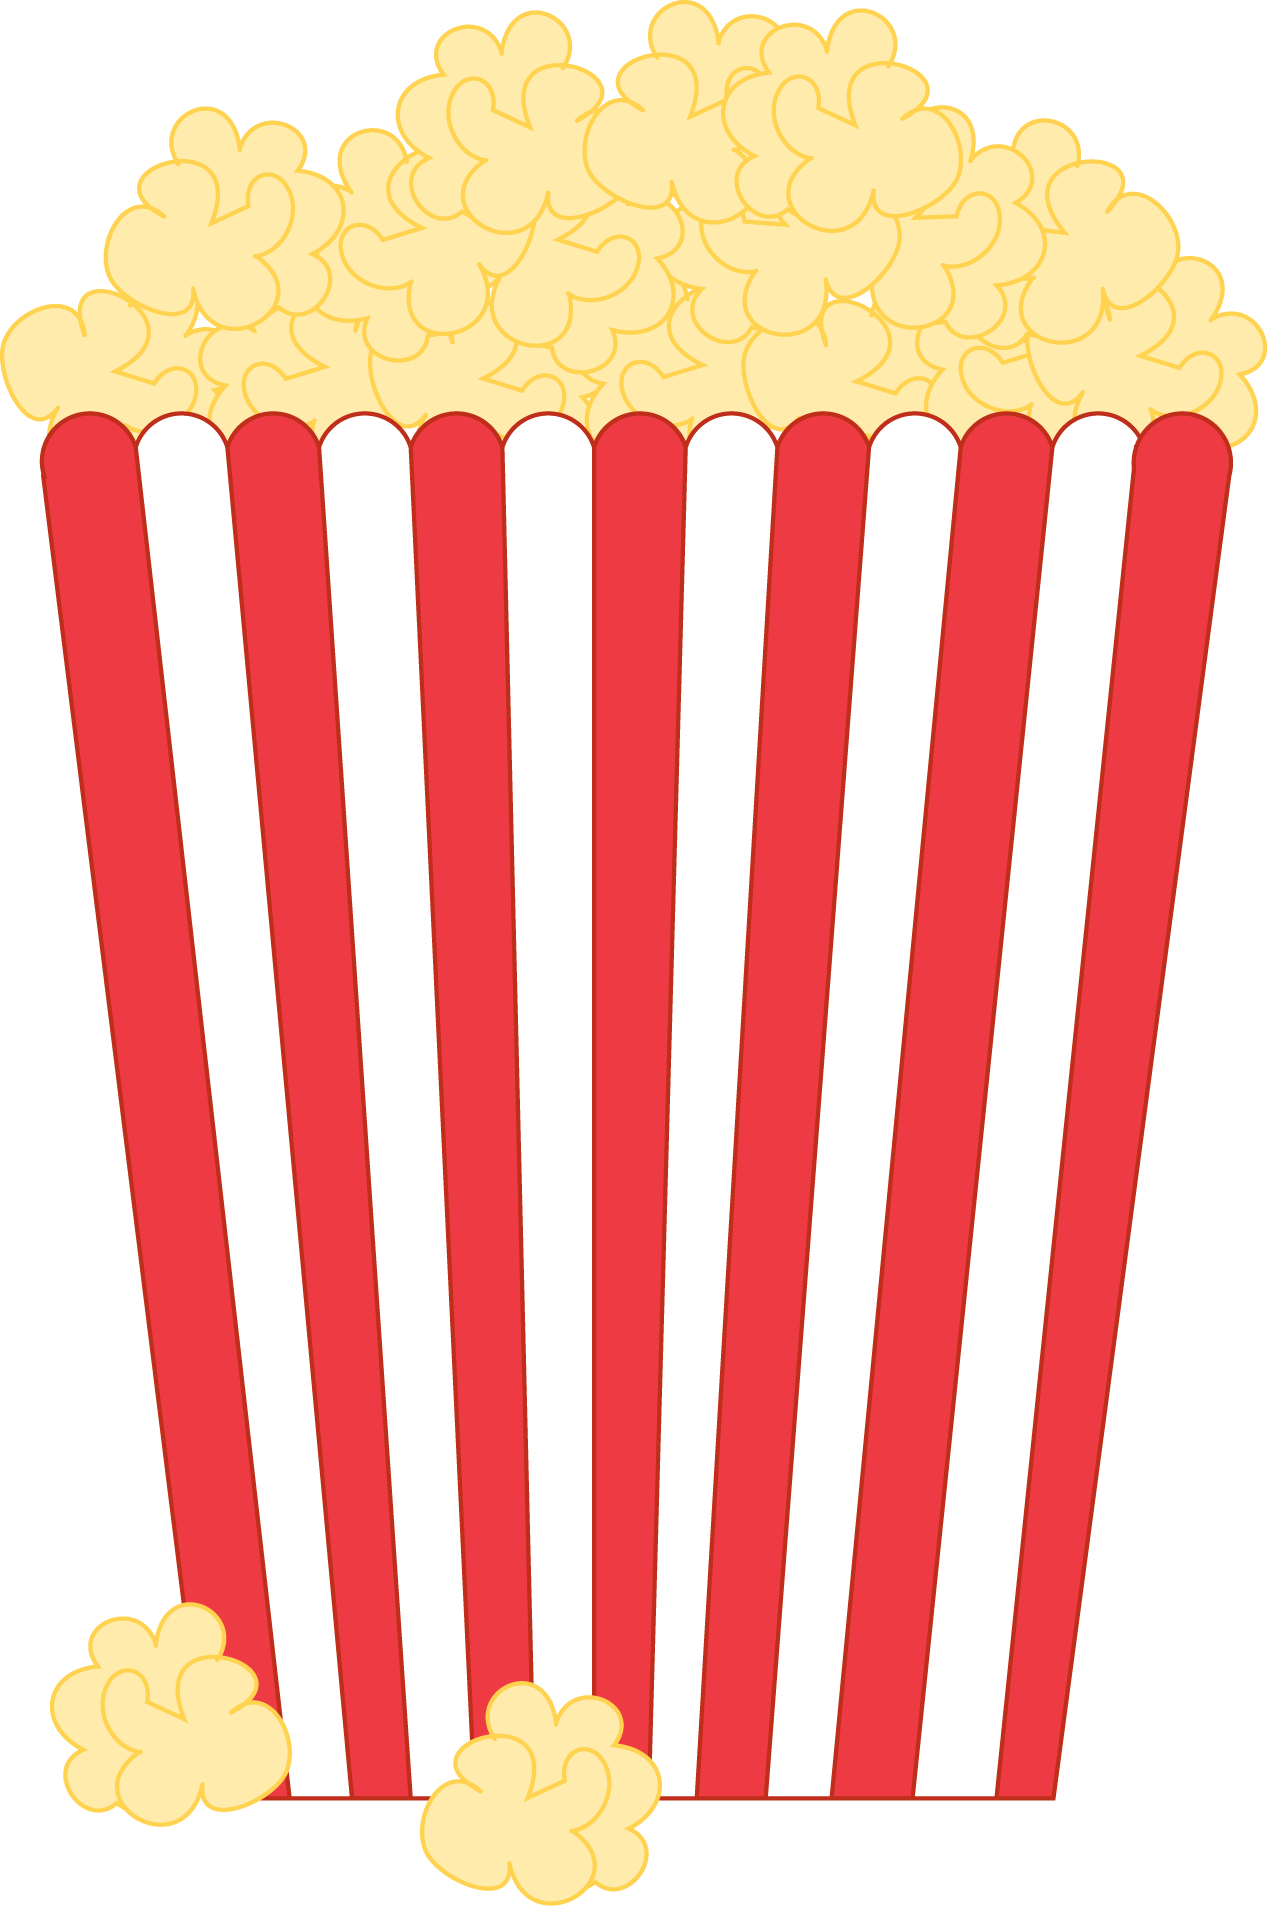 Carnival Popcorn Png Image Clipart